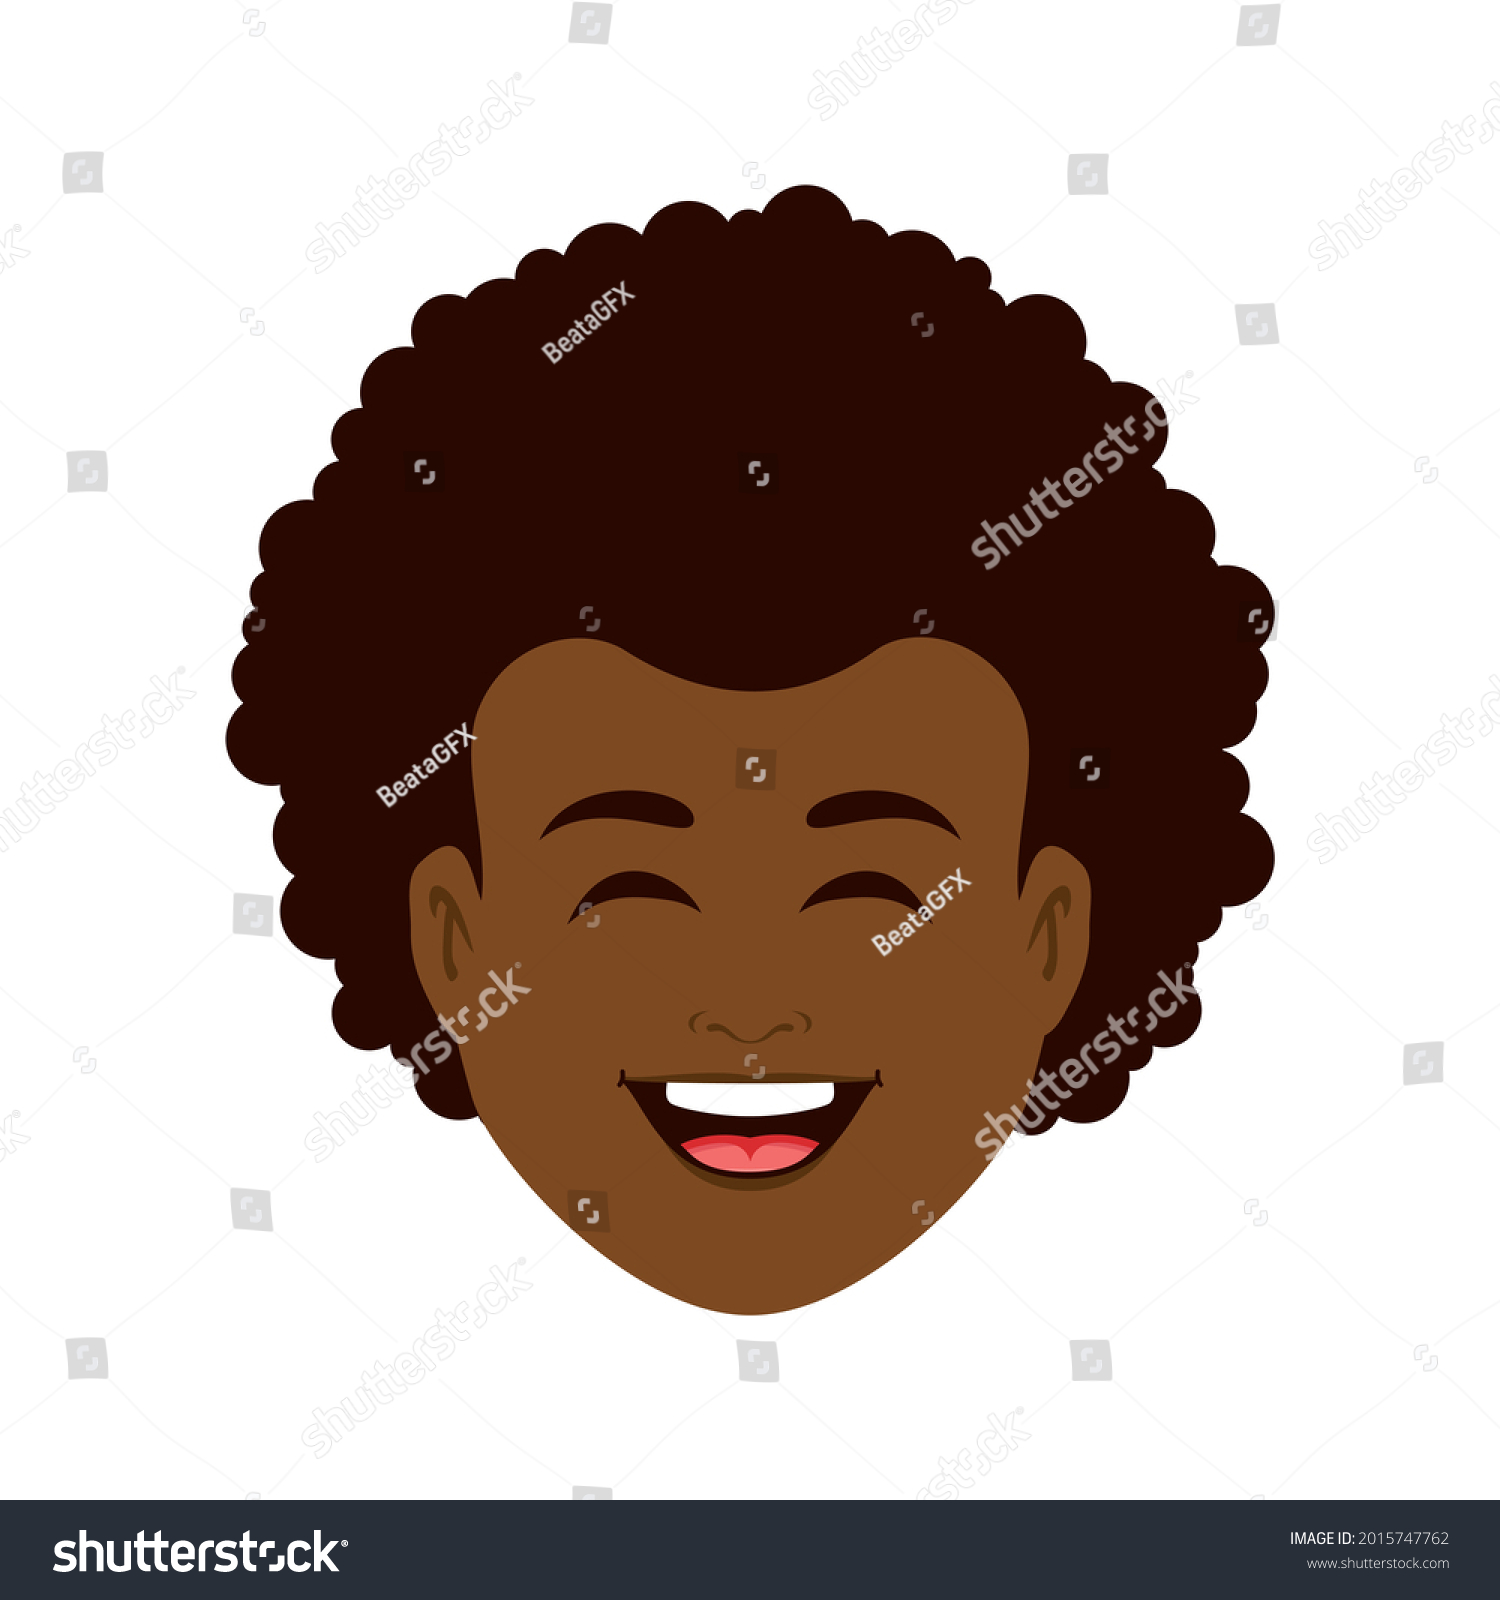 SVG of African american laughing young man head icon vector. Funny ethnic boy face icon isolated on a white background. Happy smiling black man portrait clip art svg